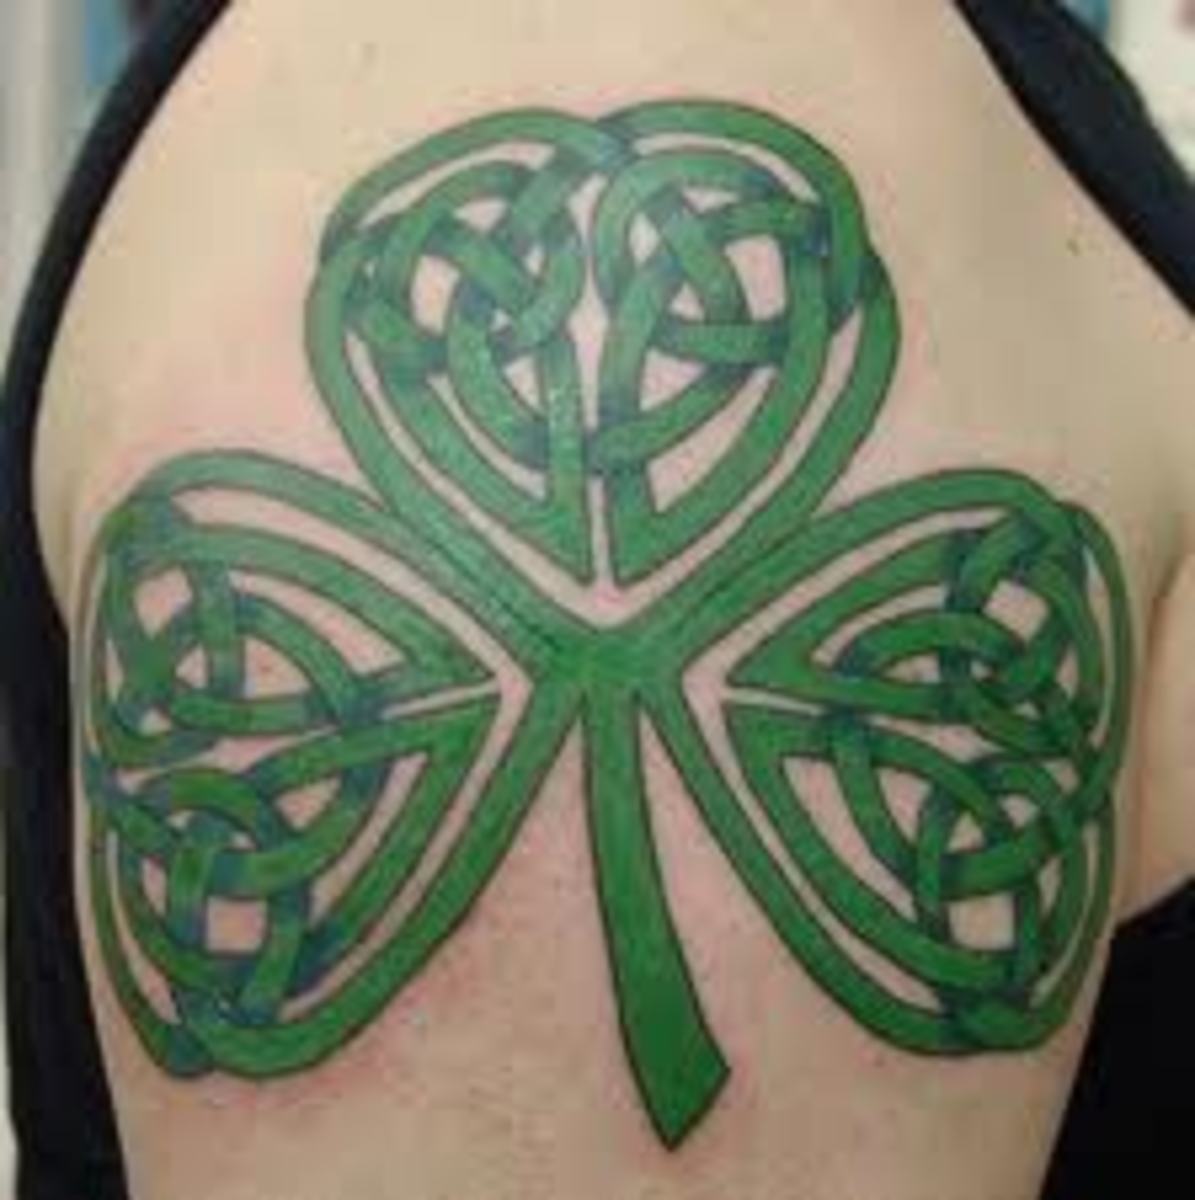 Celtic Tattoo Designs And Celtic Tattoo Meanings-Popular Celtic Tattoos And Meanings-Celtic Tattoo History And Design